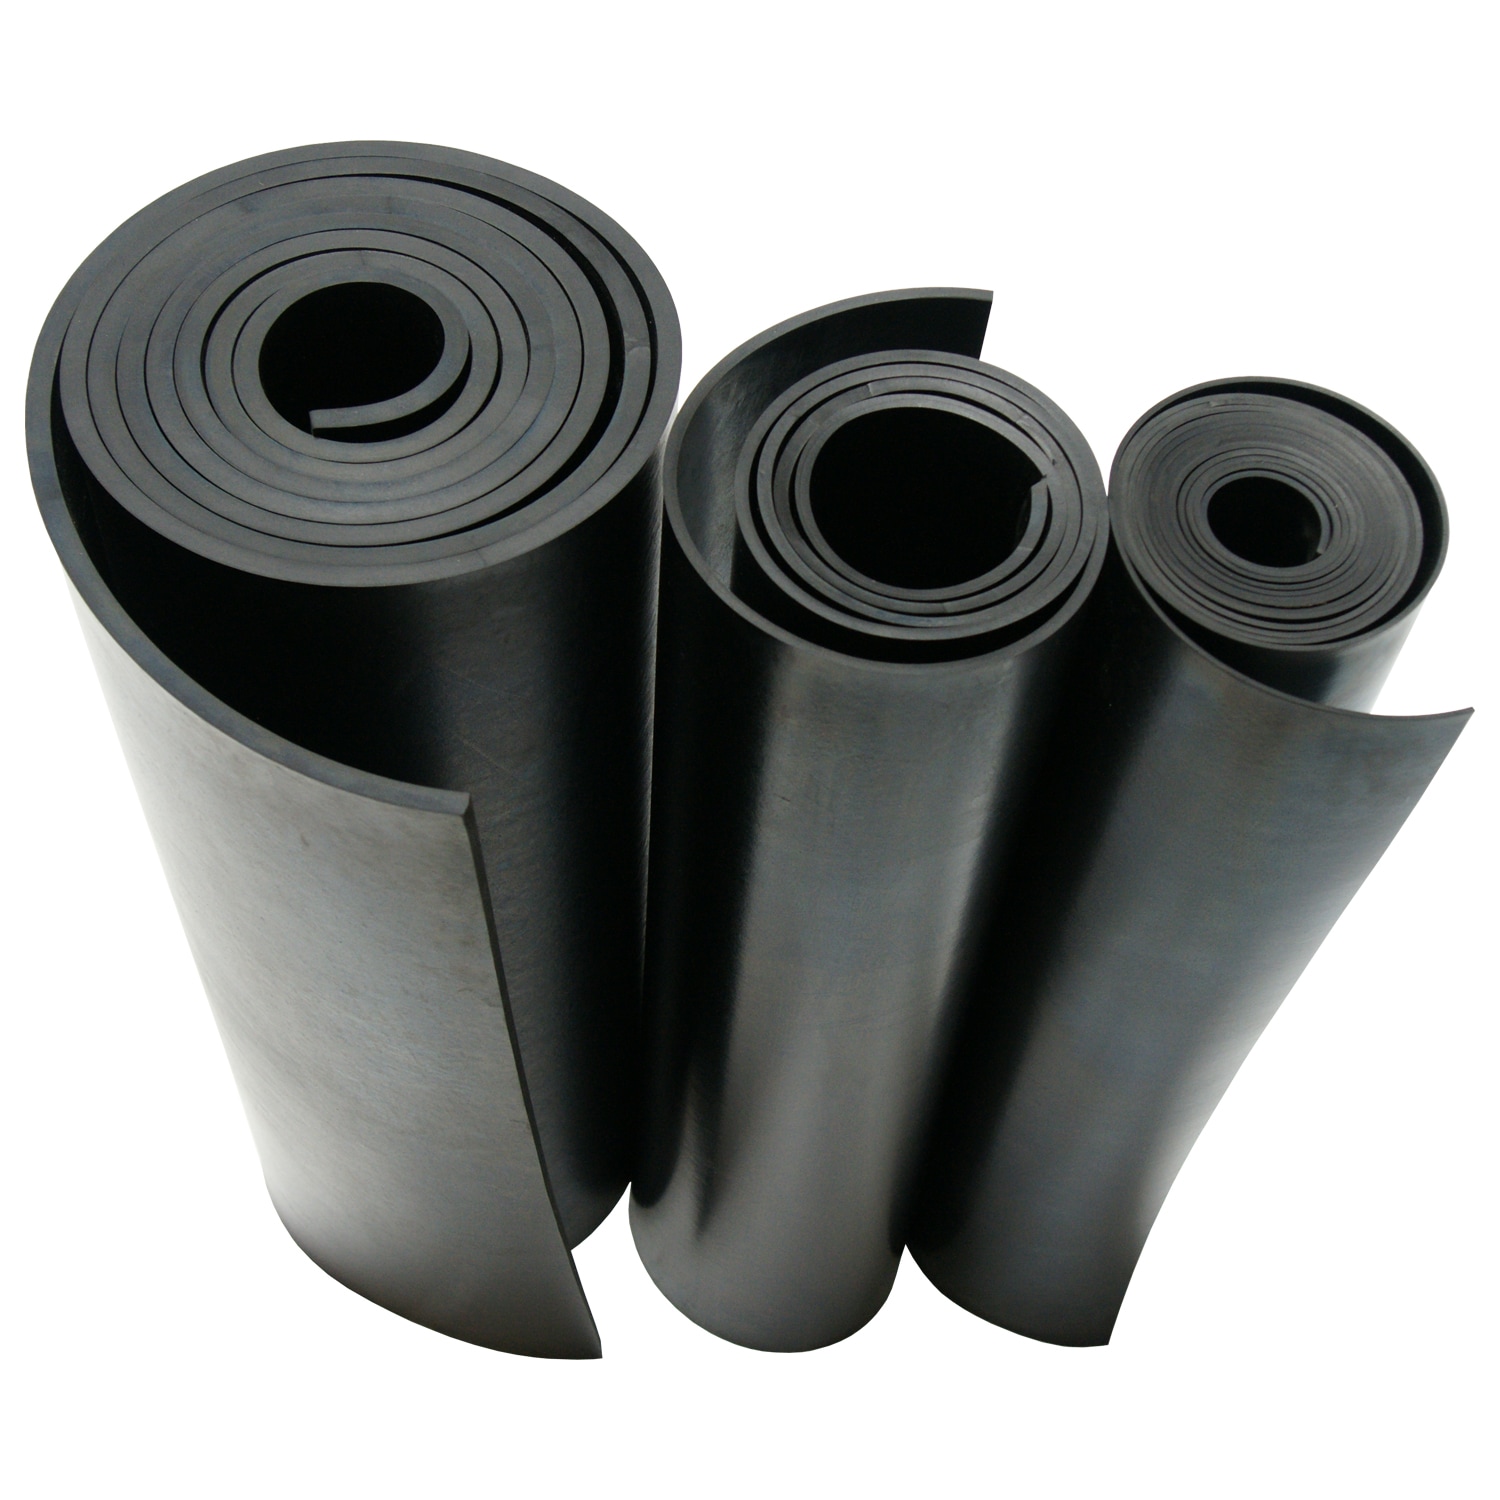 LATEX RUBBER SHEET – American Material Supply